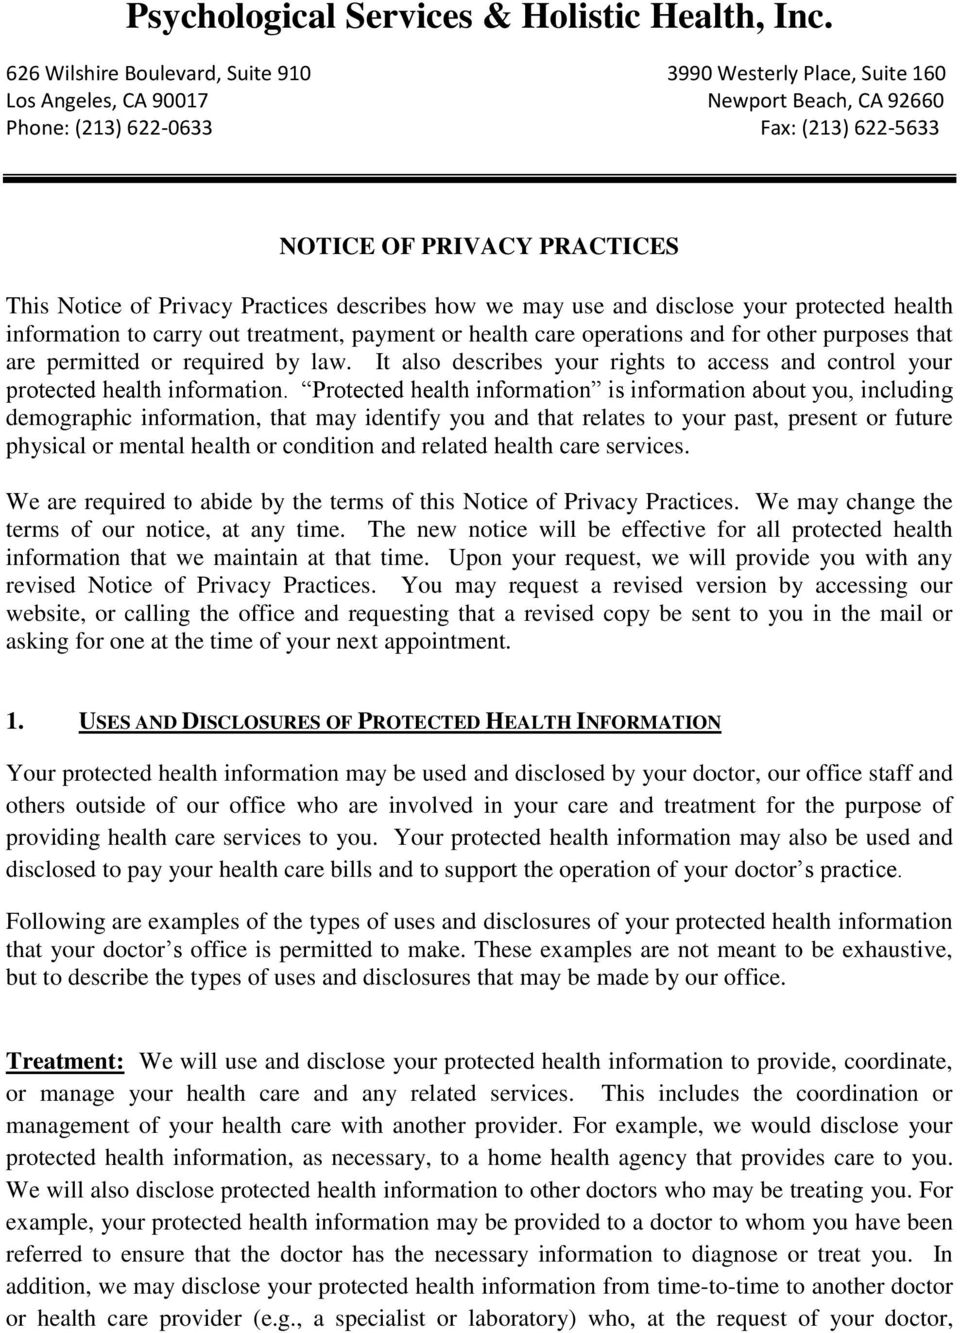 Privacy Practices describes how we may use and disclose your protected health information to carry out treatment, payment or health care operations and for other purposes that are permitted or